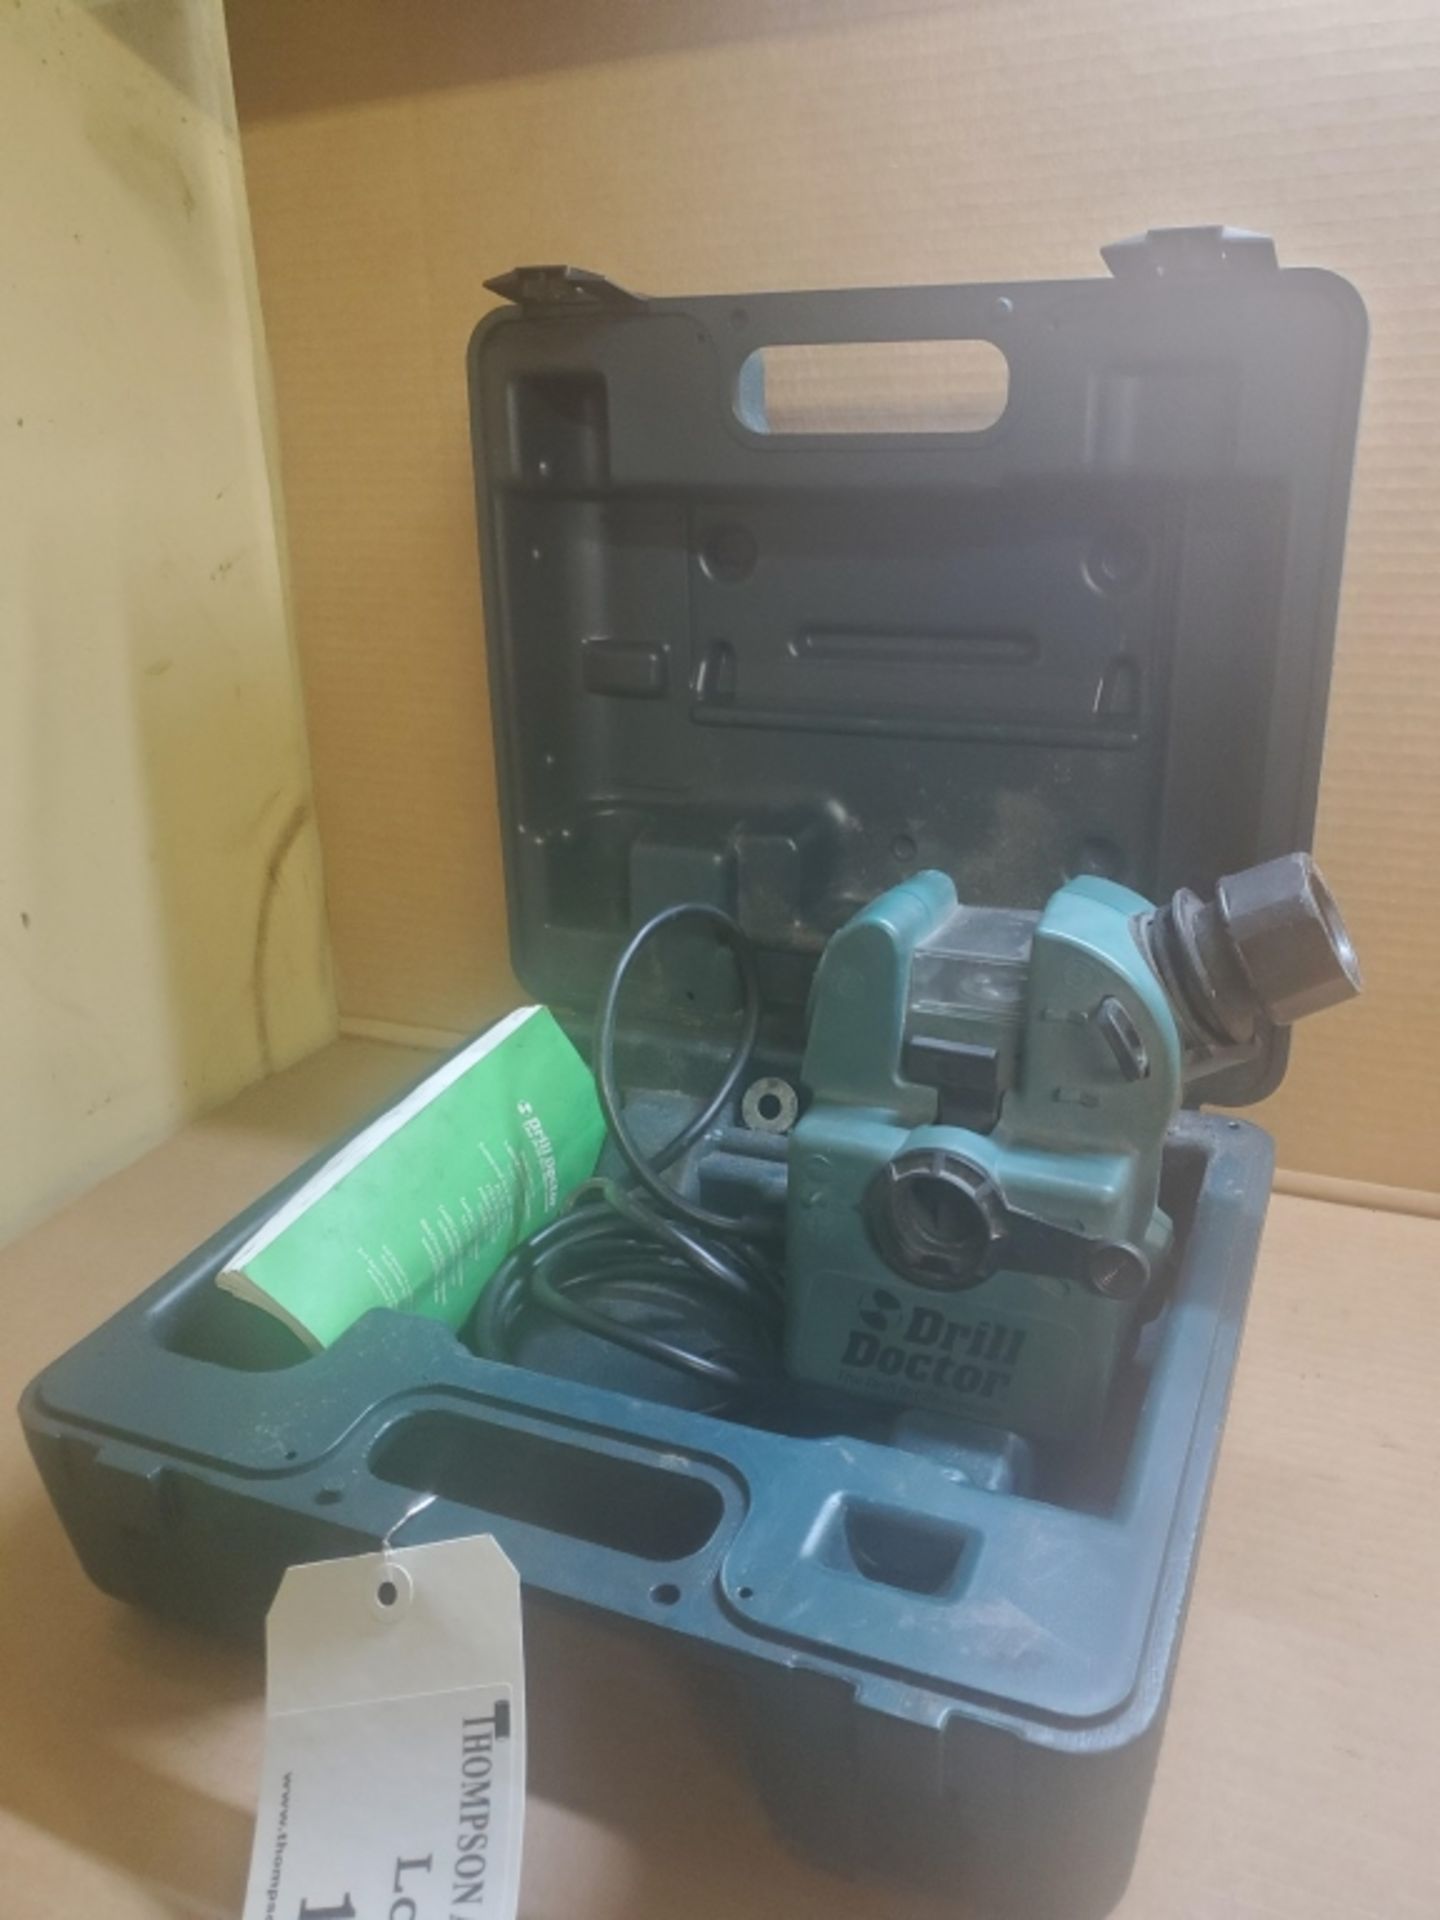 Drill Doctor Model 750 Drill Bit Sharpener With Case and Manual